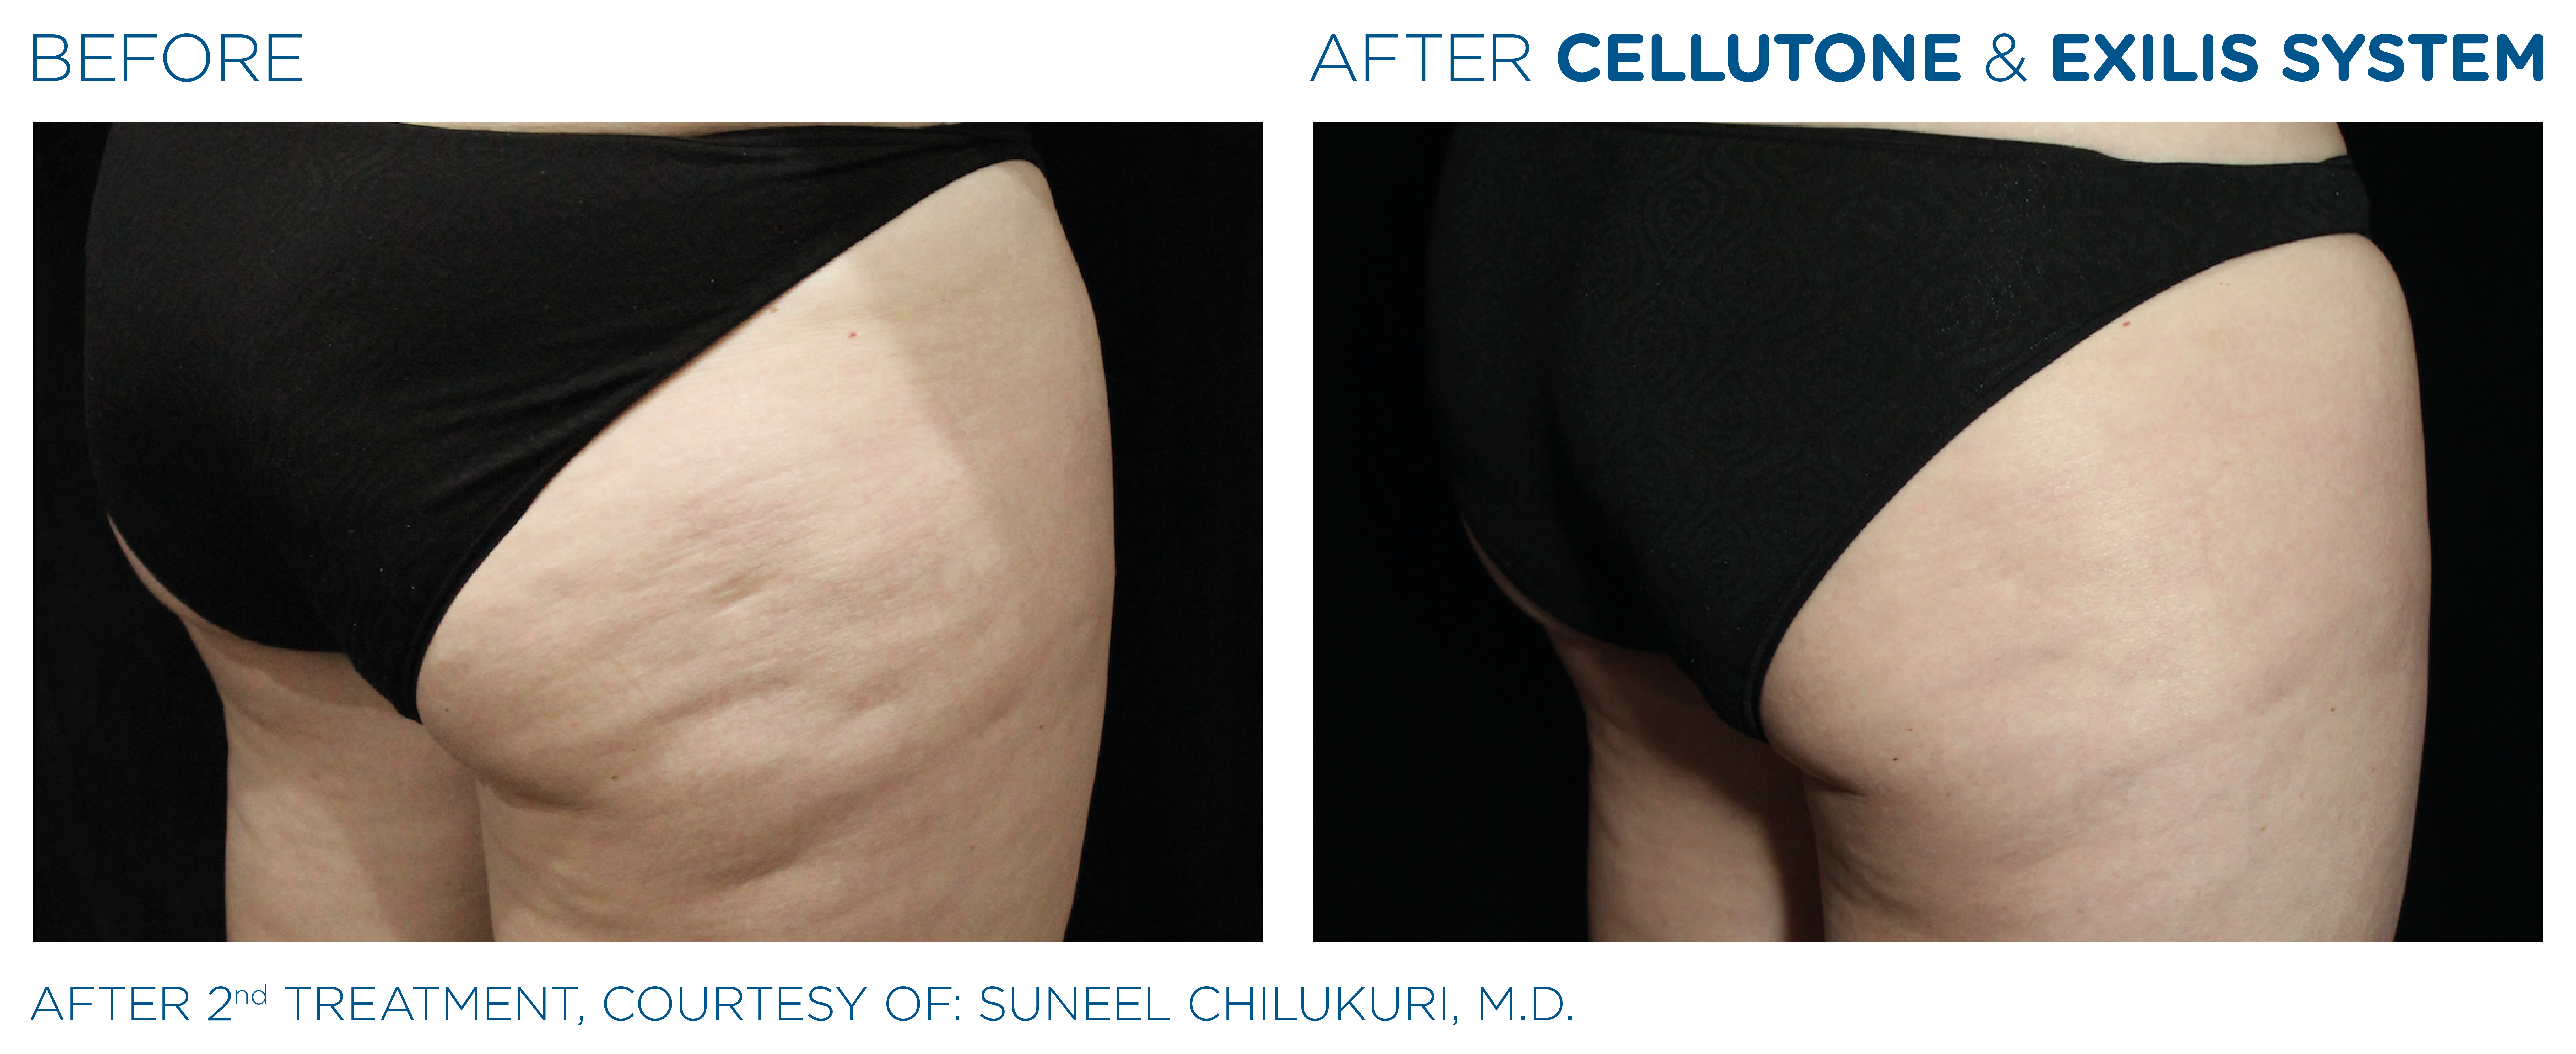 before and after treatment with Cellutone and Exilis System butt area